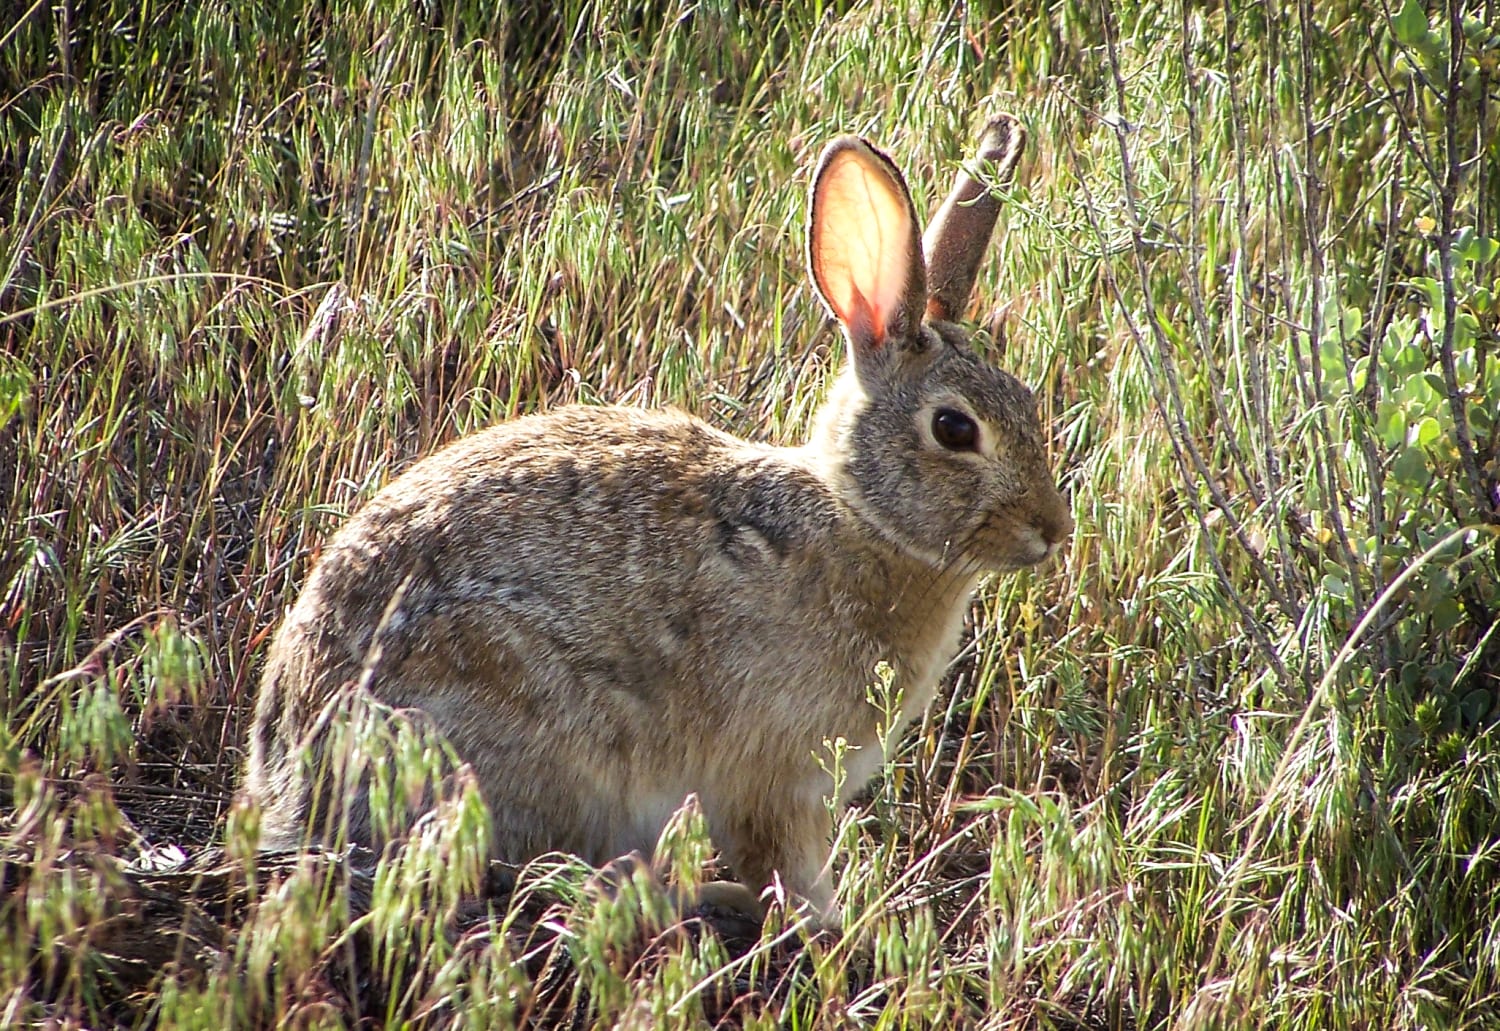 Do not touch or move dead rabbits': National Parks warn of bunny virus